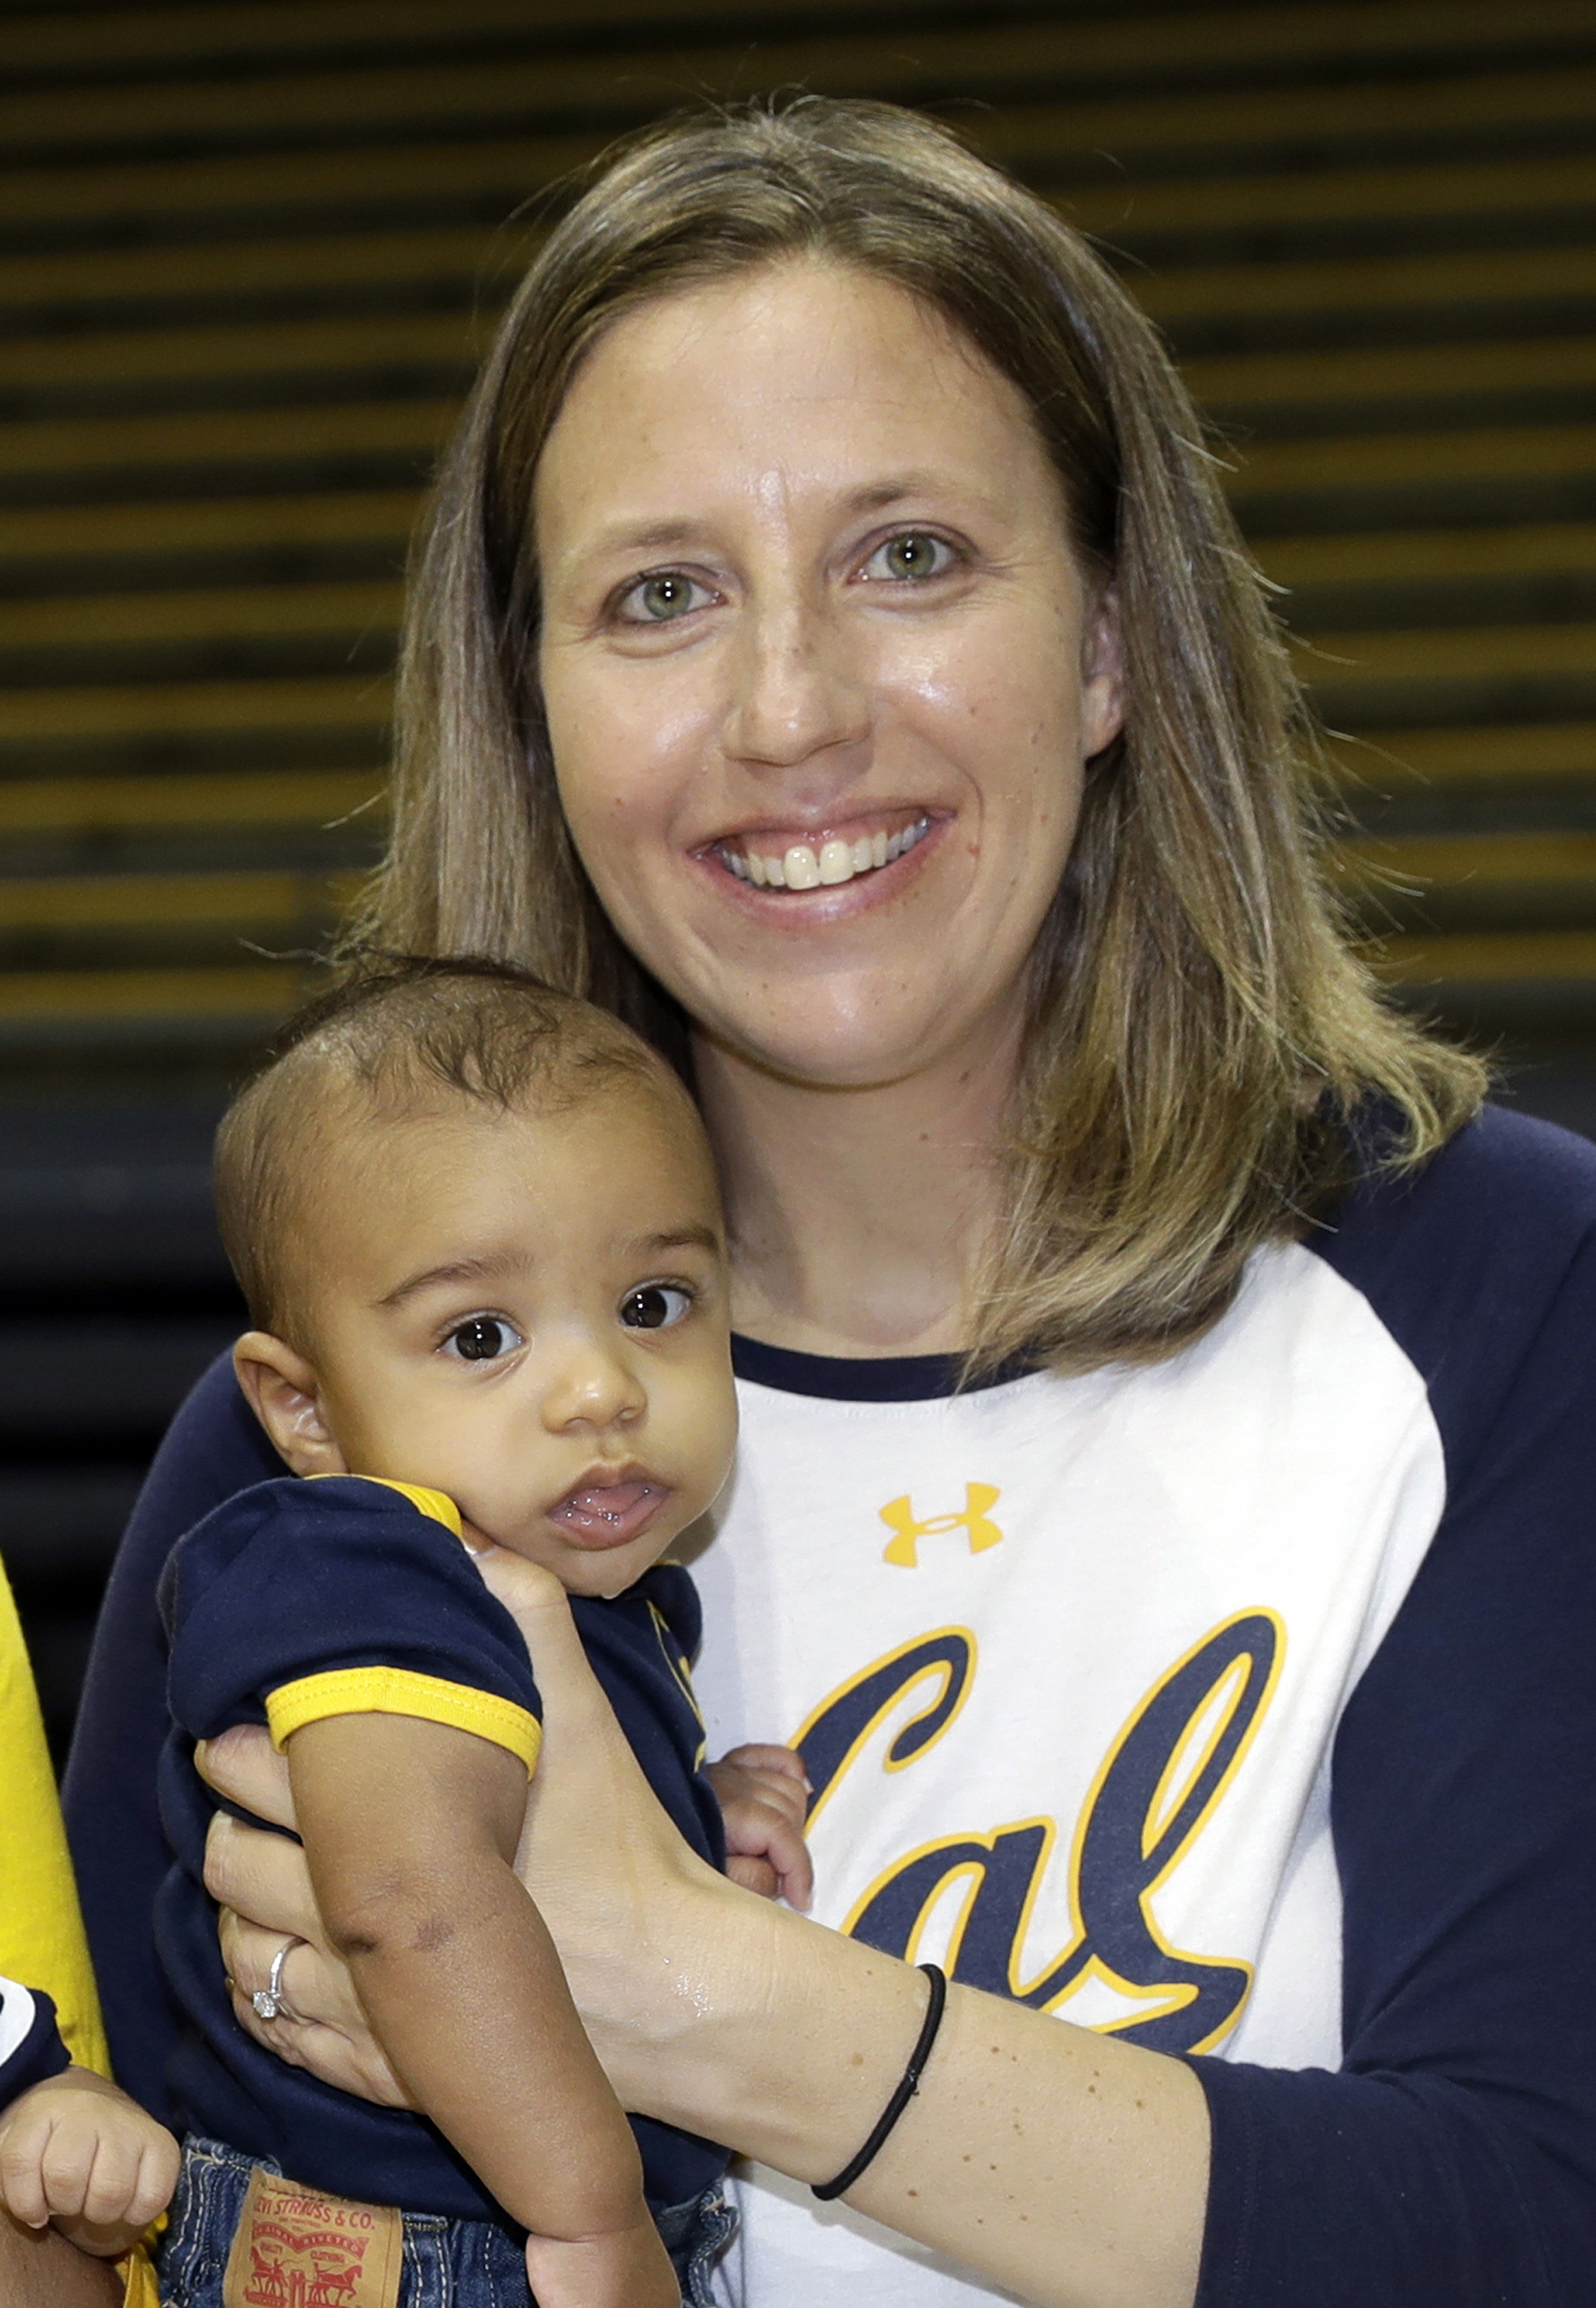 In an Aug. 30, 2017, photo, California women's basketball coach Lindsay Gottlieb holds her then-6-month-old son, Jordan, during NCAA college basketball practice on the campus.